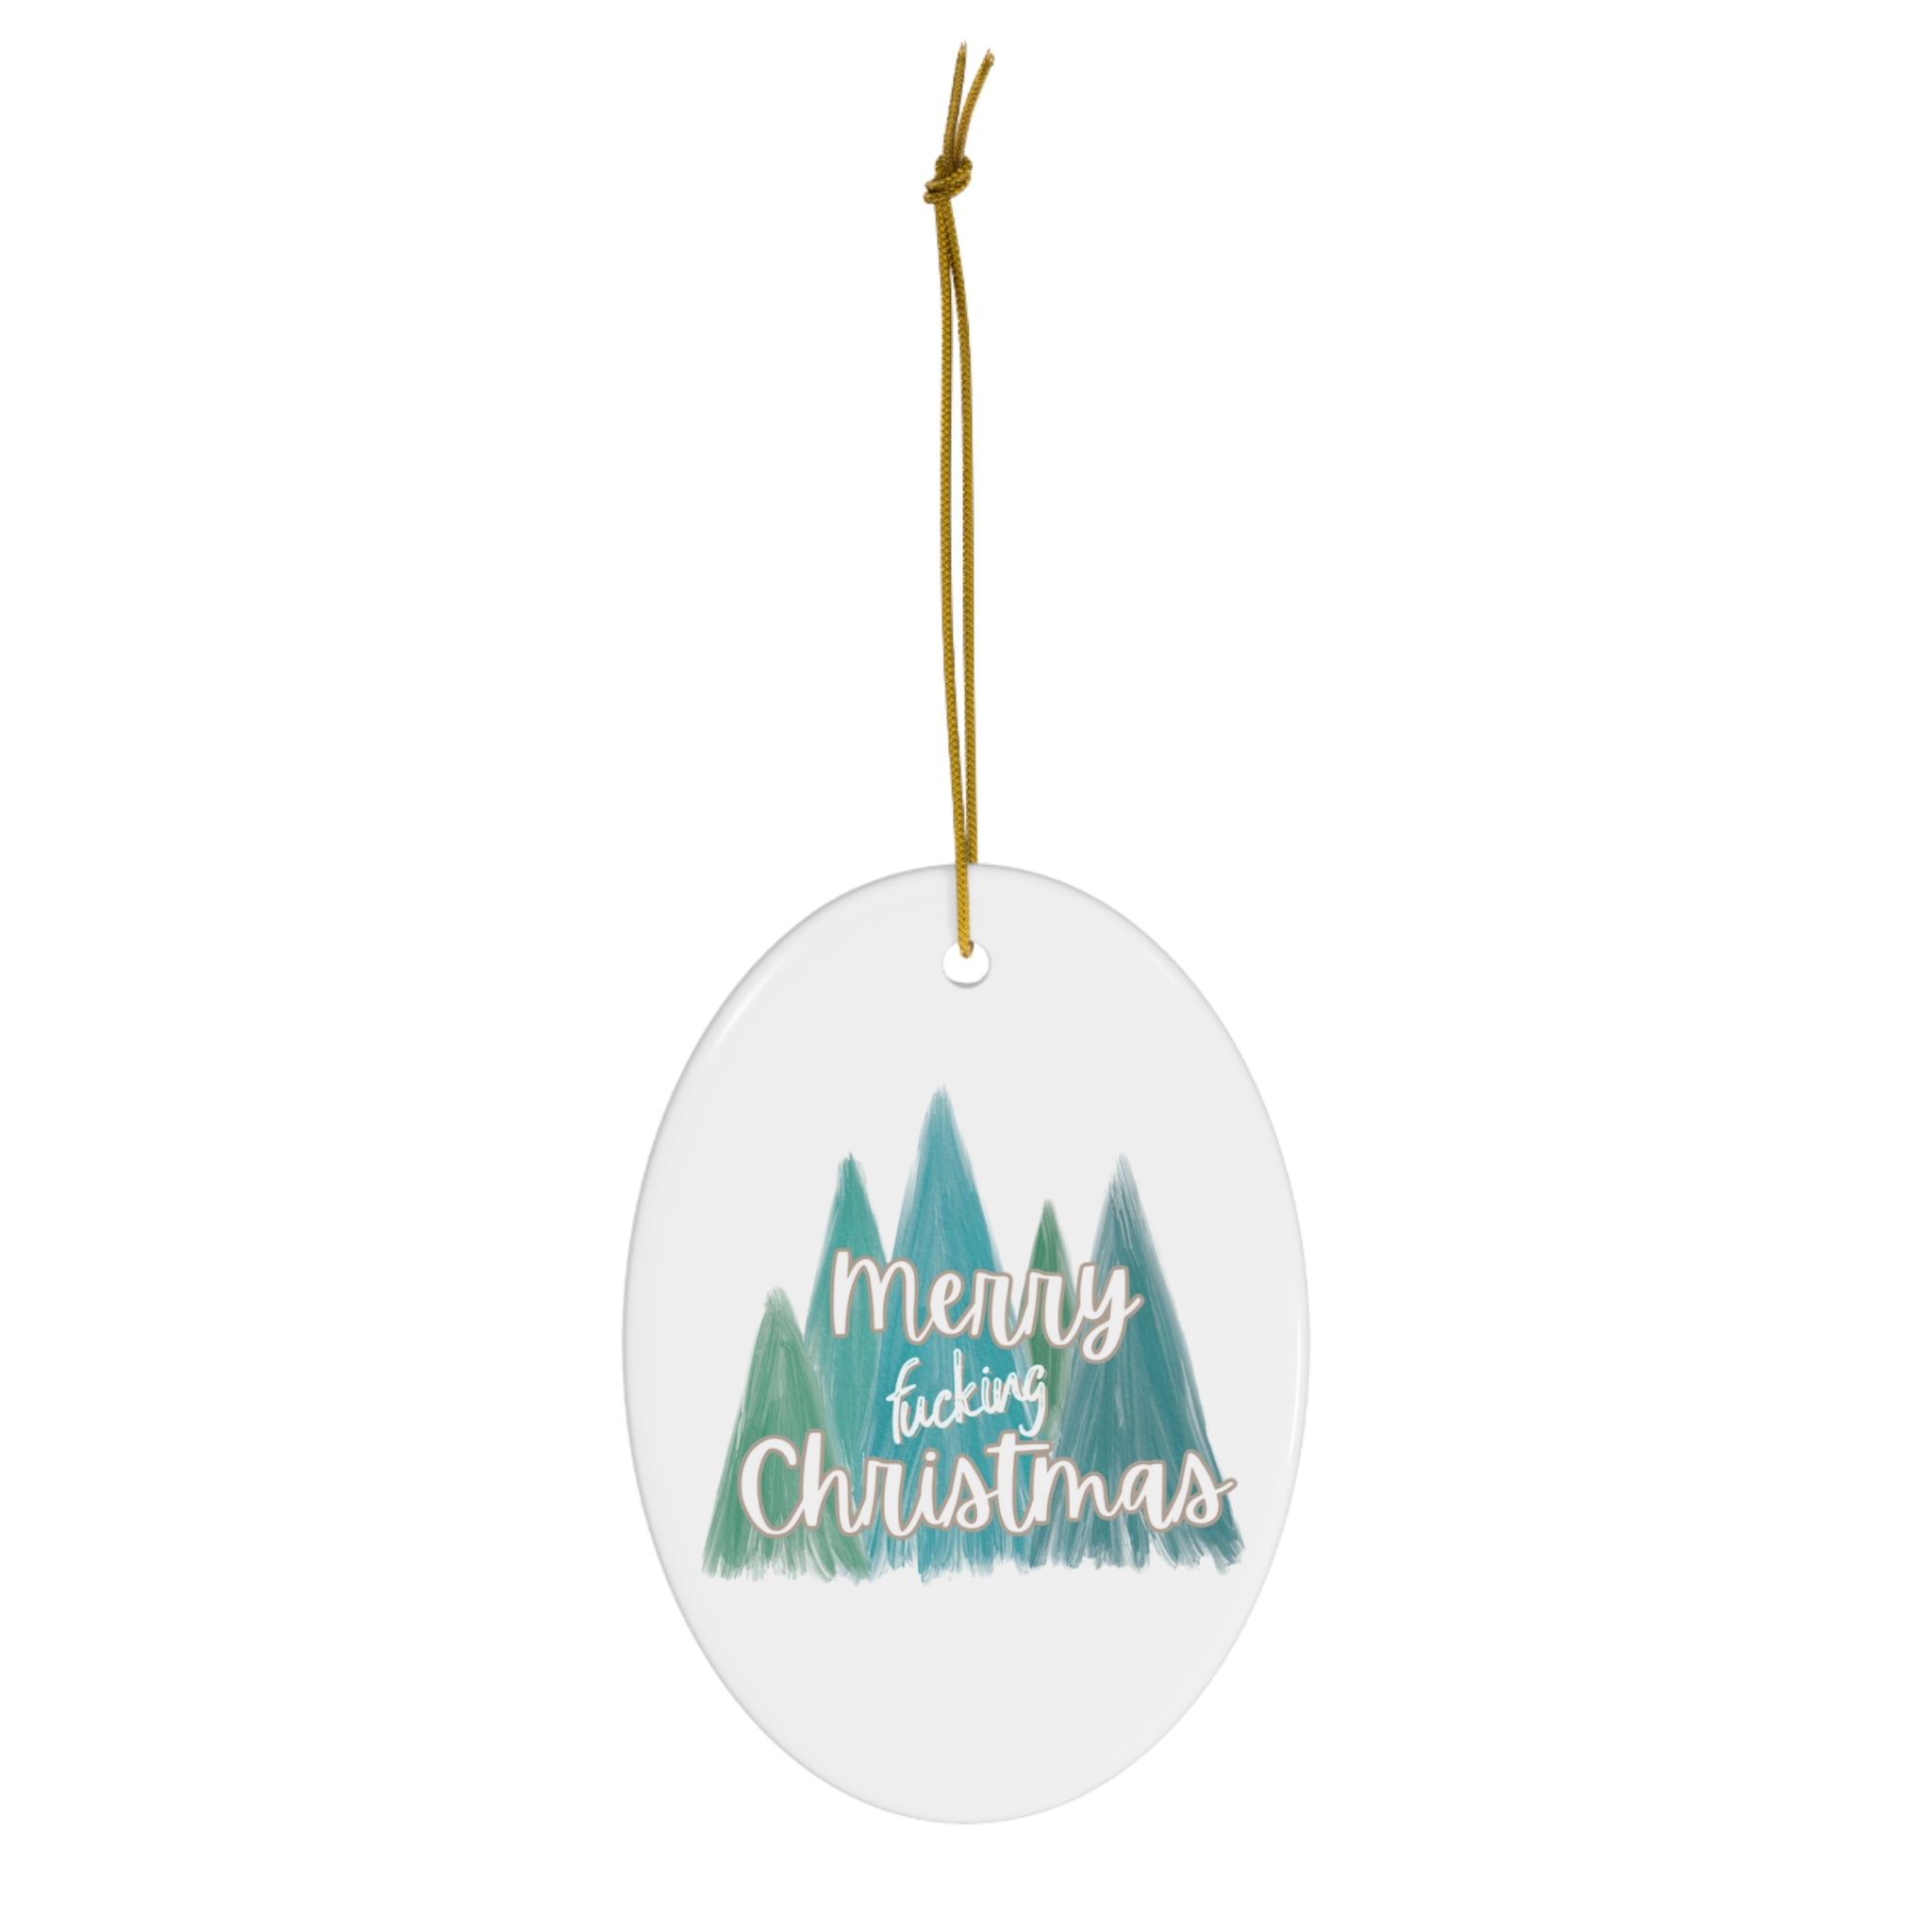  Merry Fucking Christmas (Turquoise Trees) Ceramic Ornament, Sweary Christmas Ornament, Funny Porcelain Decoration, Holiday Decor Home DecorOvalOneSize